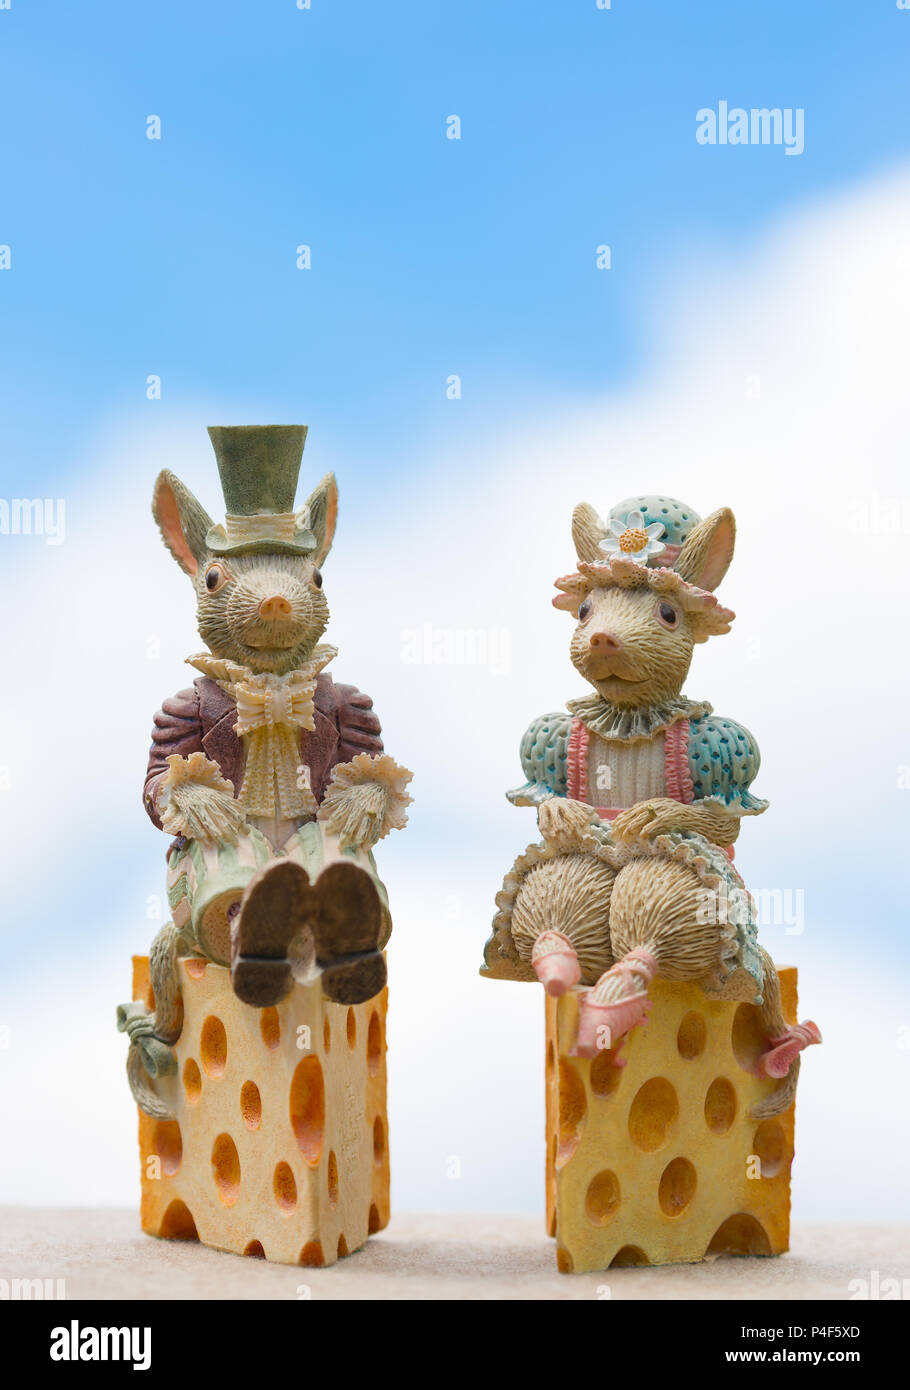 Cute bride & groom ornaments (mice) given as wedding gift to the special couple on their special day; outdoors shot with blue sky & fluffy clouds. Stock Photo